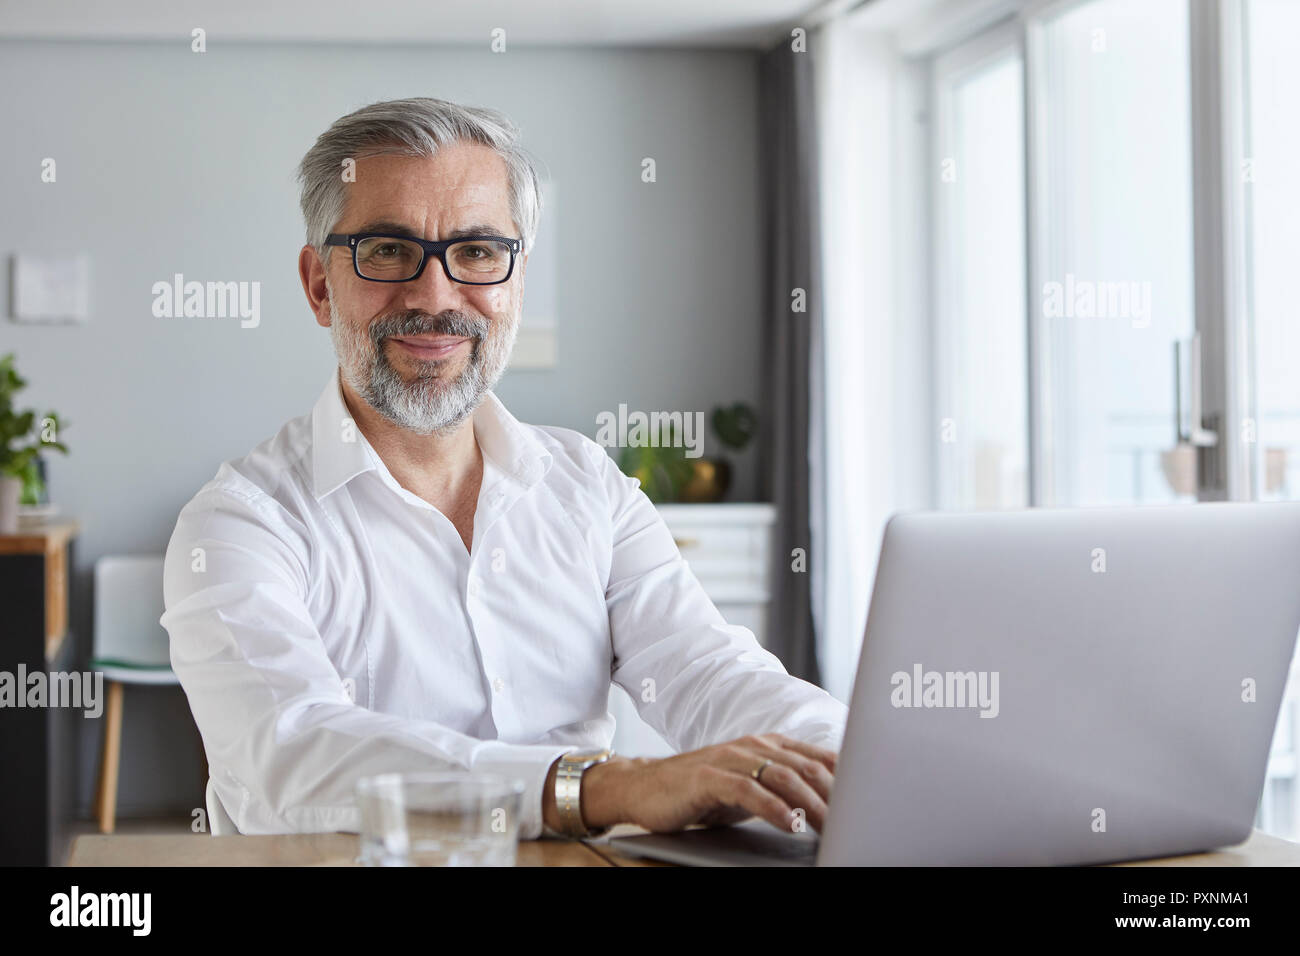 Portrait of smiling mature man using laptop at home Stock Photo